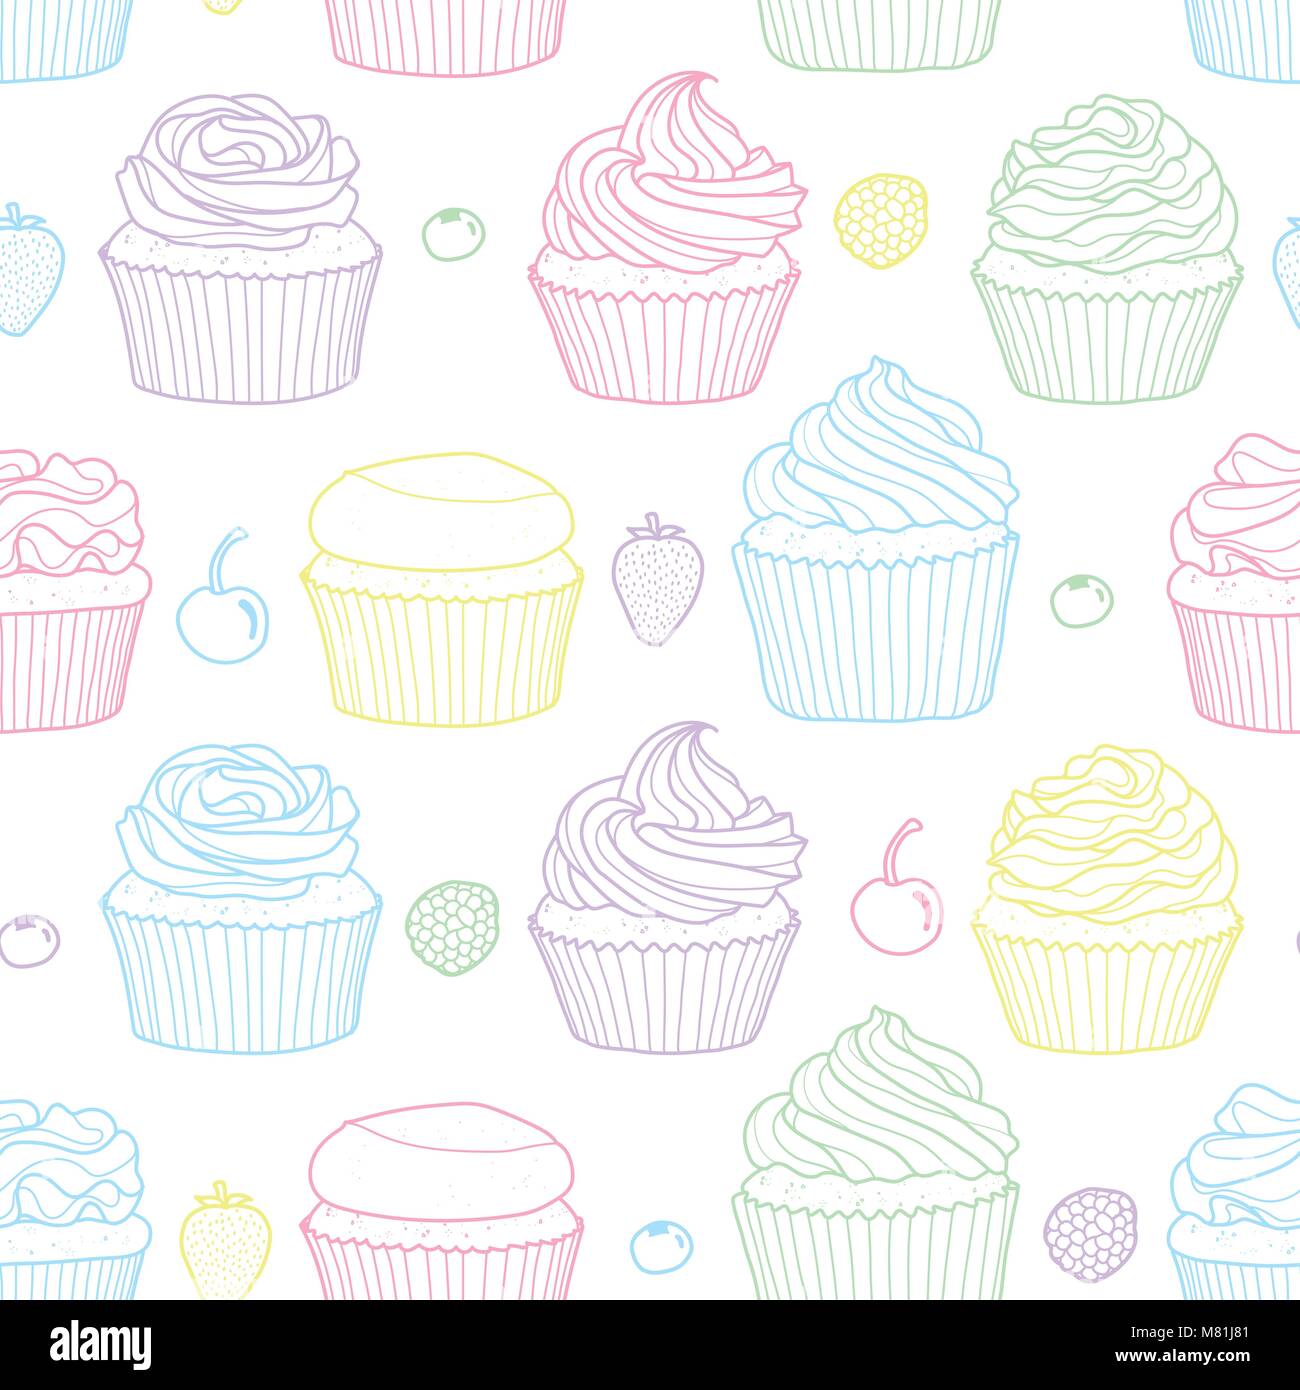 6 styles of cupcake and fruits random on white background. Cute hand drawn seamless pattern of dessert in colorful pastel outline. Stock Vector